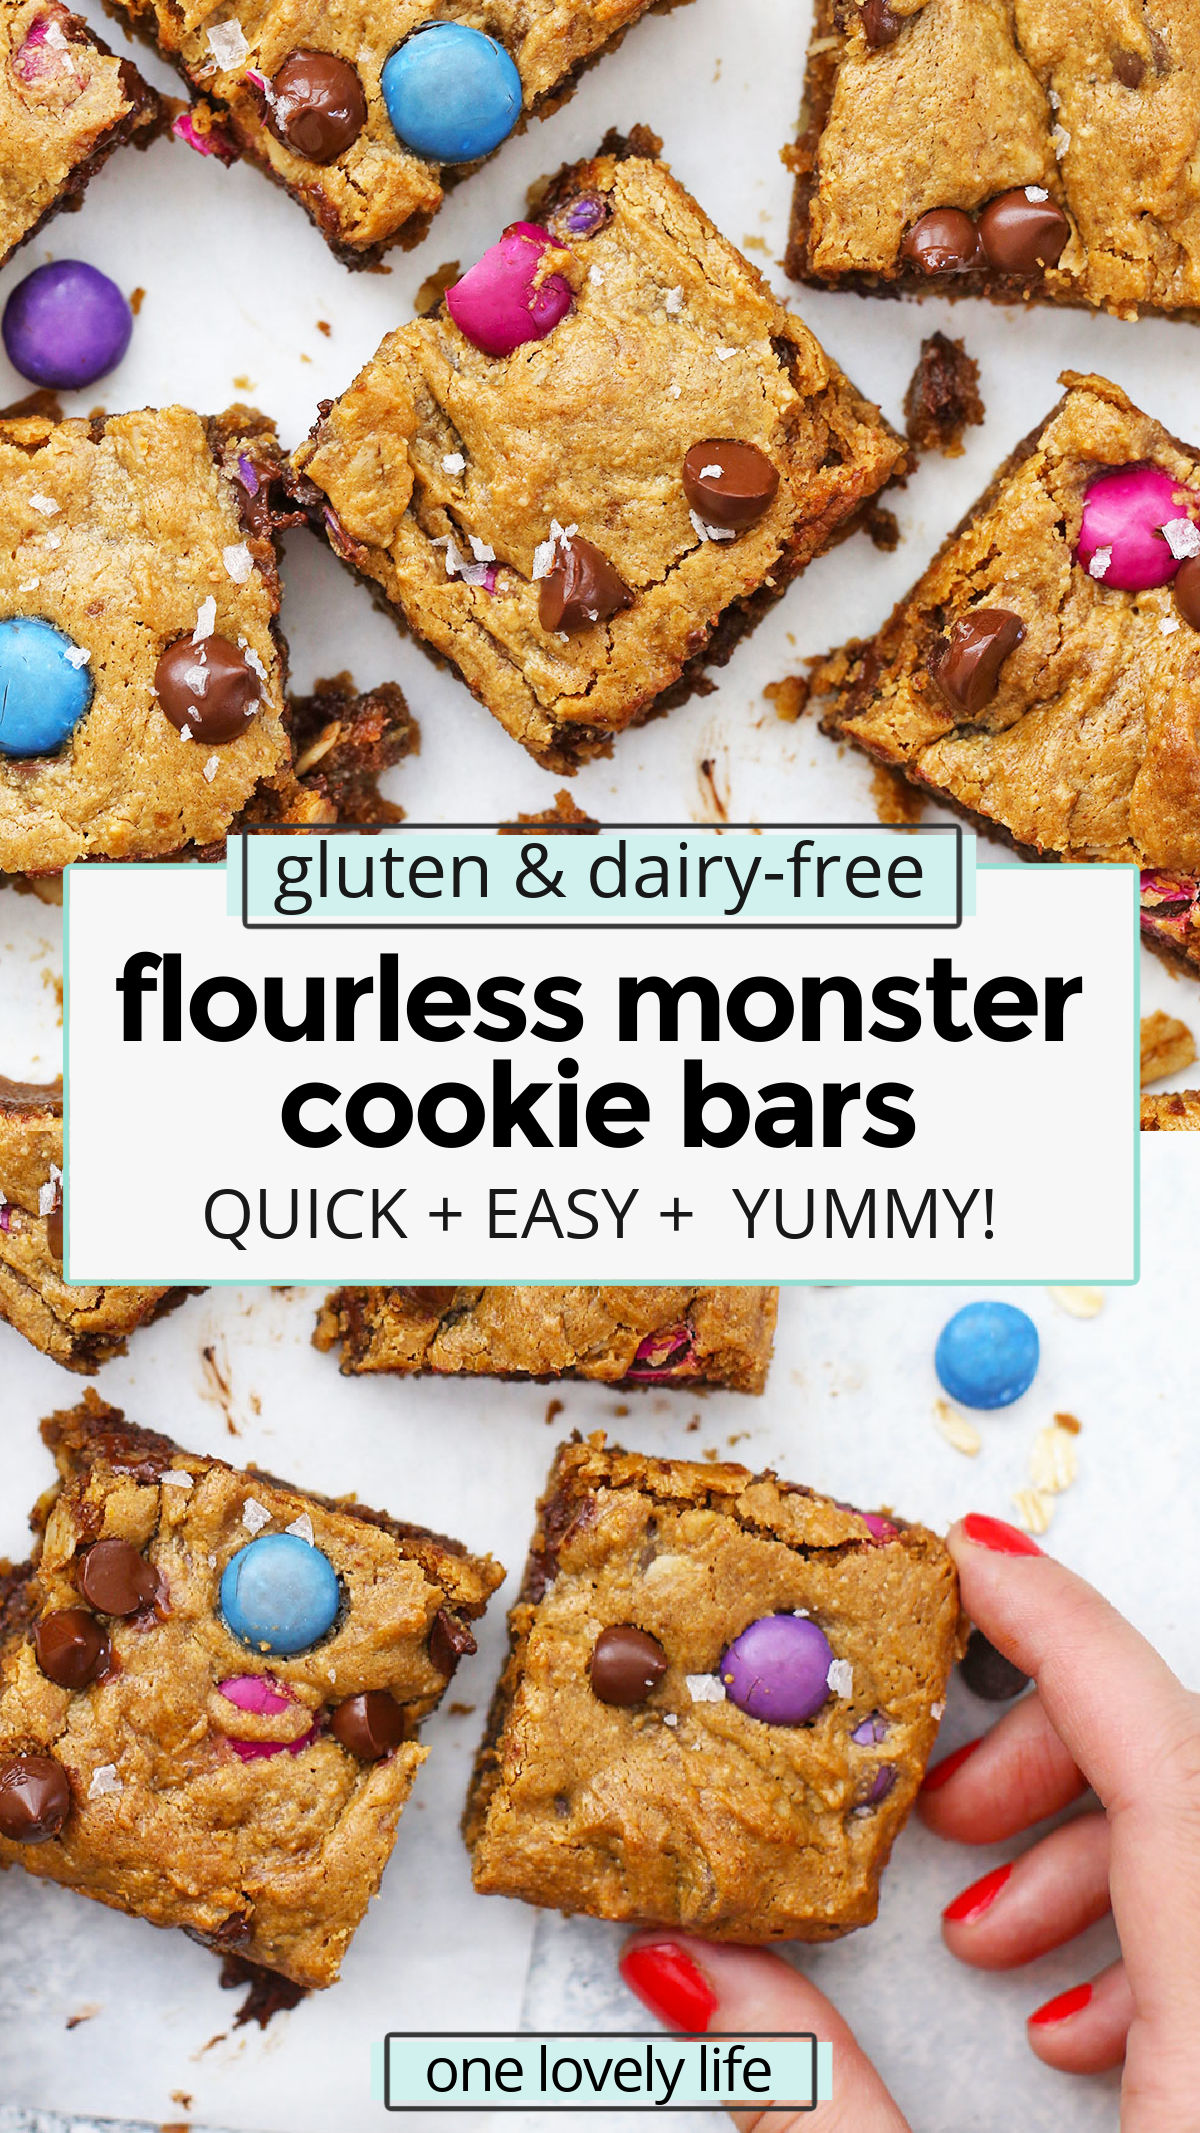 Flourless Monster Cookie Bars - These delicious peanut butter blondies are studded with rolled oats, chocolate chips, and chocolate candies. Plus, they're gluten free and dairy free! The perfect easy treat to satisfy your sweet tooth. // monster cookie blondies // gluten-free monster cookie bars // monster cookie bars no flour // dairy free monster cookie bars // gluten free cookie bars // flourless cookie bars // flourless cookies // flourless dessert  